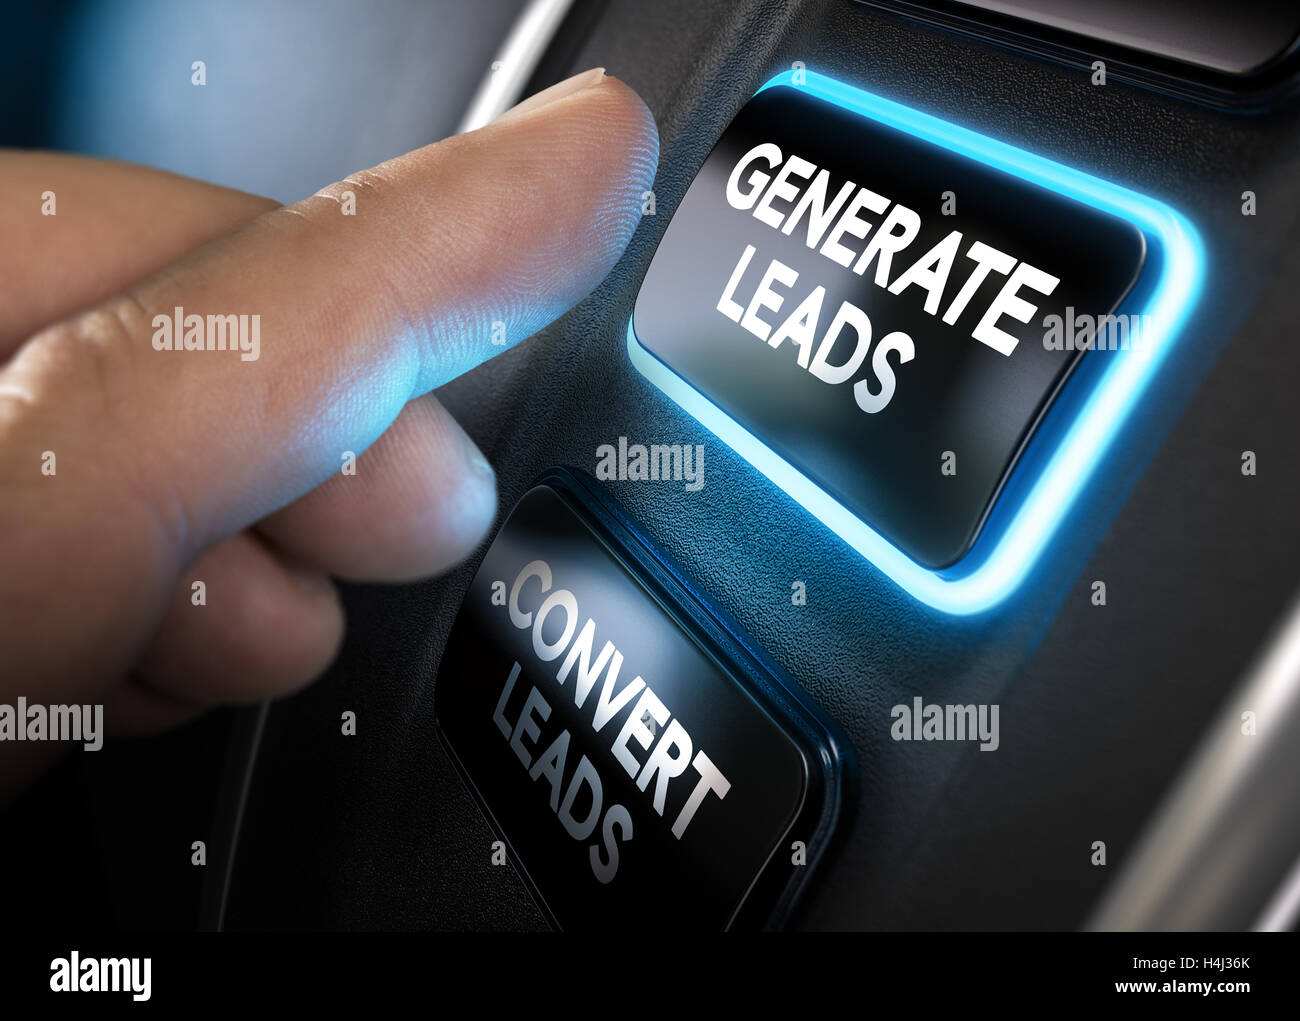 Hand about to press a generate leads button with blue light over black background. Concept of lead management. Composite between Stock Photo